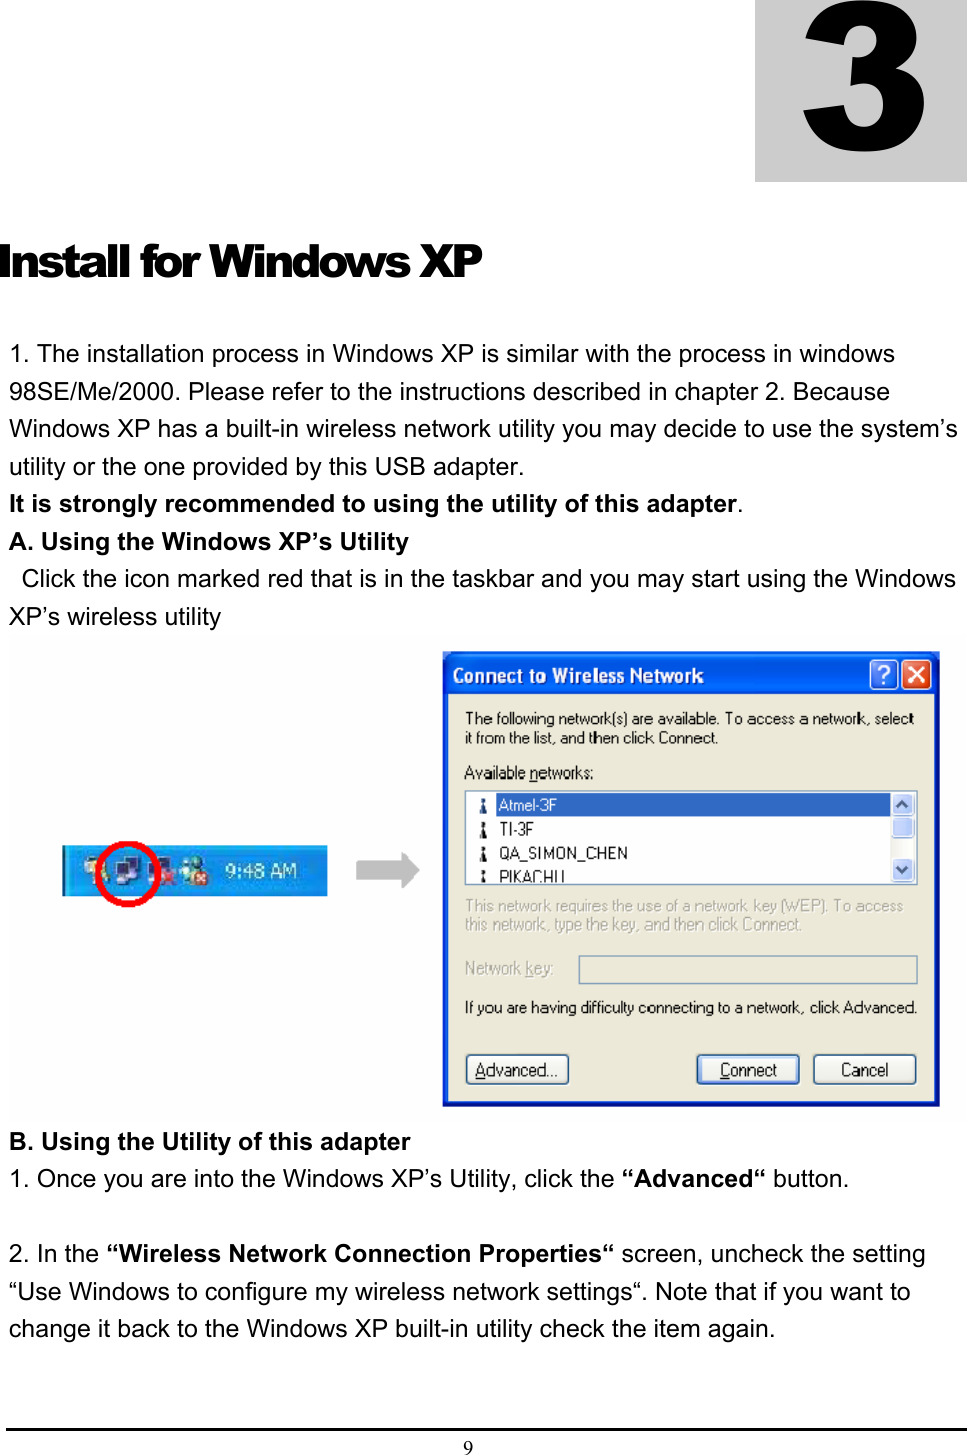  9  Install for Windows XP 1. The installation process in Windows XP is similar with the process in windows 98SE/Me/2000. Please refer to the instructions described in chapter 2. Because Windows XP has a built-in wireless network utility you may decide to use the system’s utility or the one provided by this USB adapter.   It is strongly recommended to using the utility of this adapter.  A. Using the Windows XP’s Utility     Click the icon marked red that is in the taskbar and you may start using the Windows XP’s wireless utility    B. Using the Utility of this adapter   1. Once you are into the Windows XP’s Utility, click the “Advanced“ button.    2. In the “Wireless Network Connection Properties“ screen, uncheck the setting “Use Windows to configure my wireless network settings“. Note that if you want to change it back to the Windows XP built-in utility check the item again.    3 